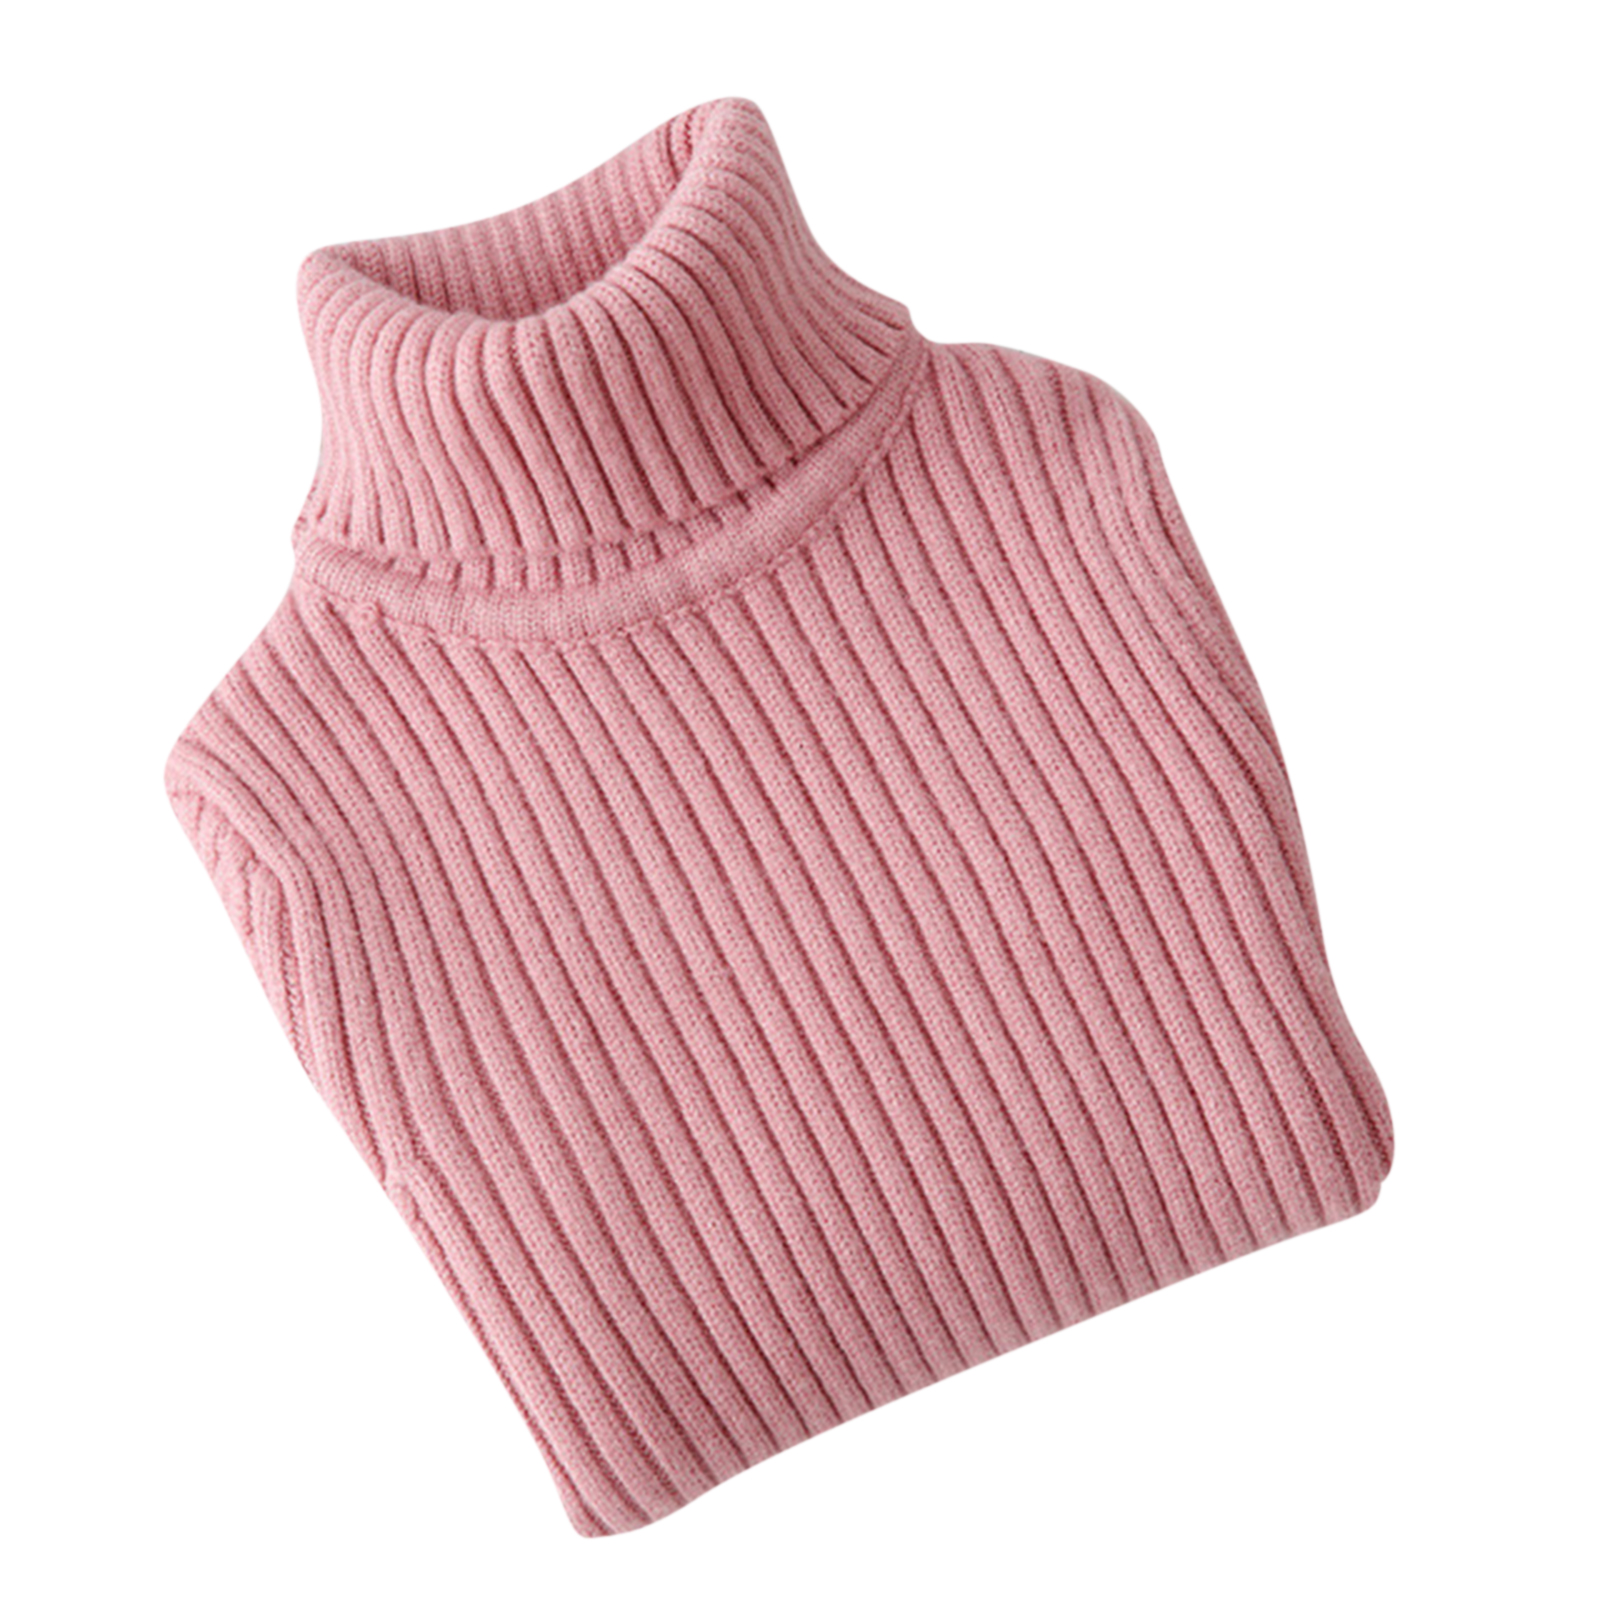 FOCUSNORM Autumn Winter Baby Girls Boys Sweater Tops Solid Knit Turtleneck Long Sleeve Pullover Warm Tops 3 Colors Outfits 2-8Y